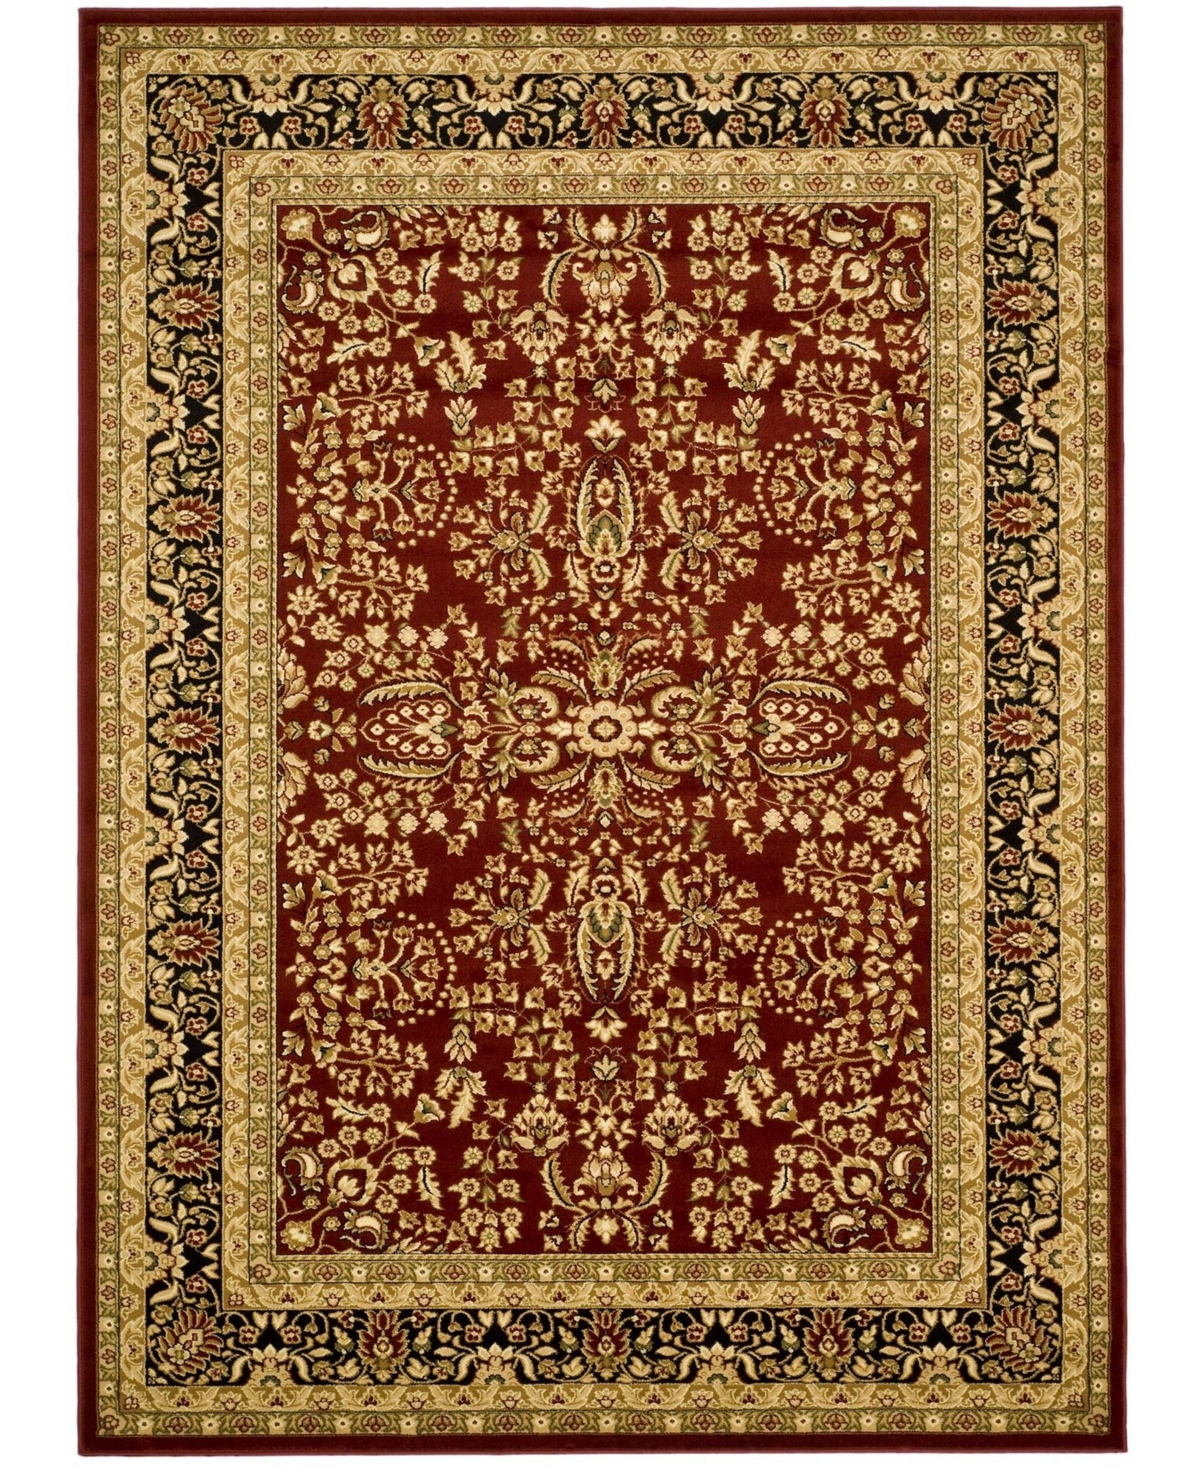 Safavieh Lyndhurst Red and Black 12' x 18' Area Rug - Red Group